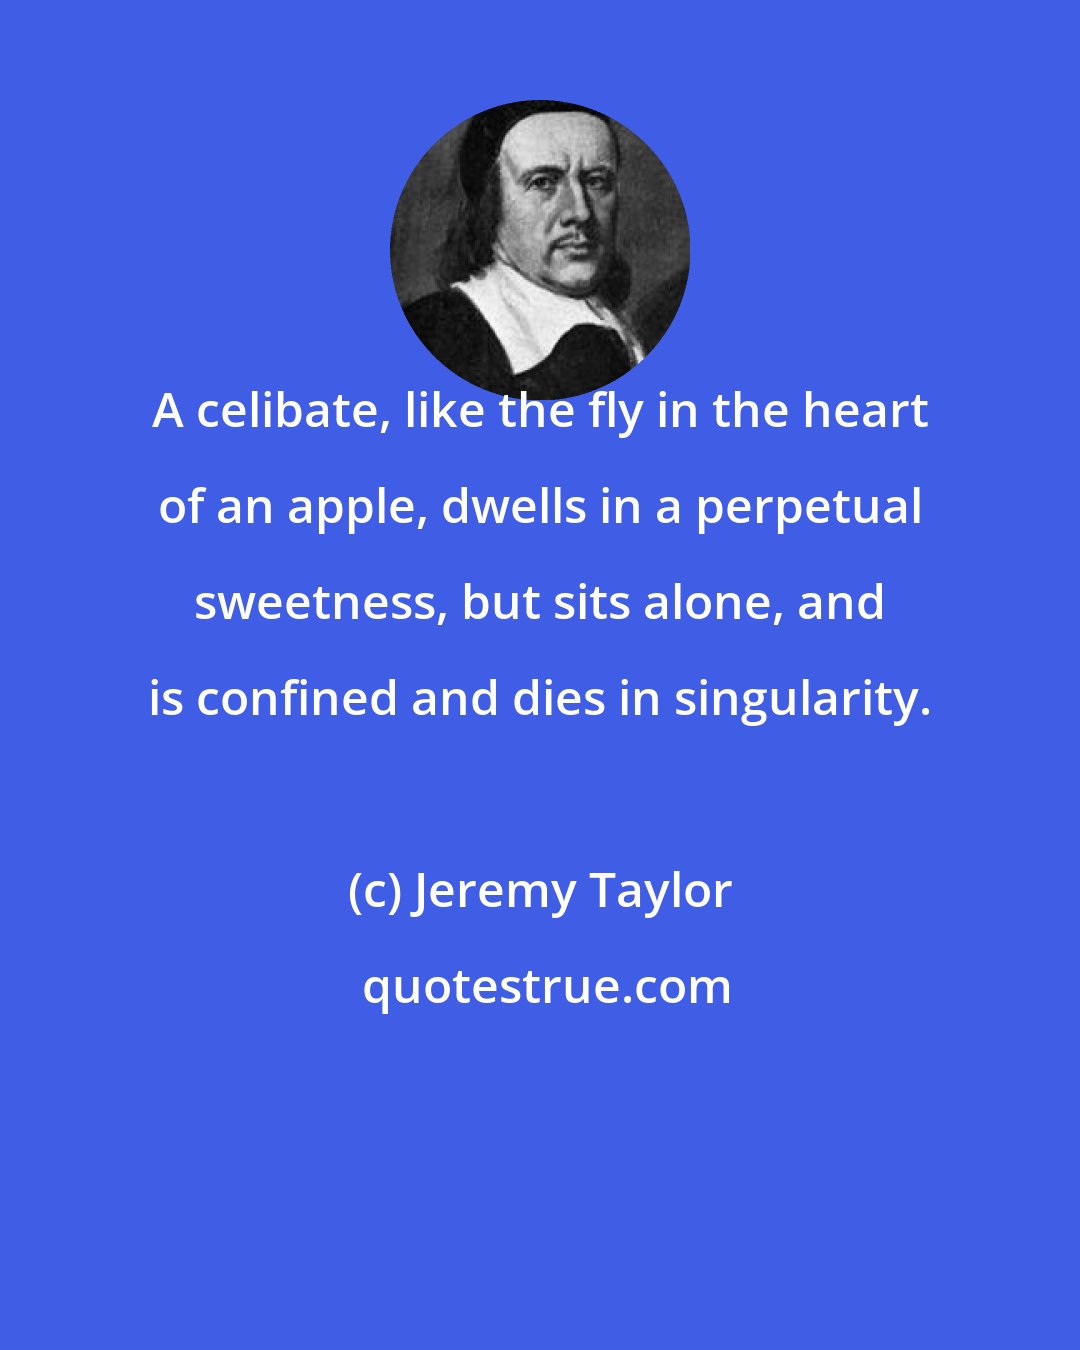 Jeremy Taylor: A celibate, like the fly in the heart of an apple, dwells in a perpetual sweetness, but sits alone, and is confined and dies in singularity.